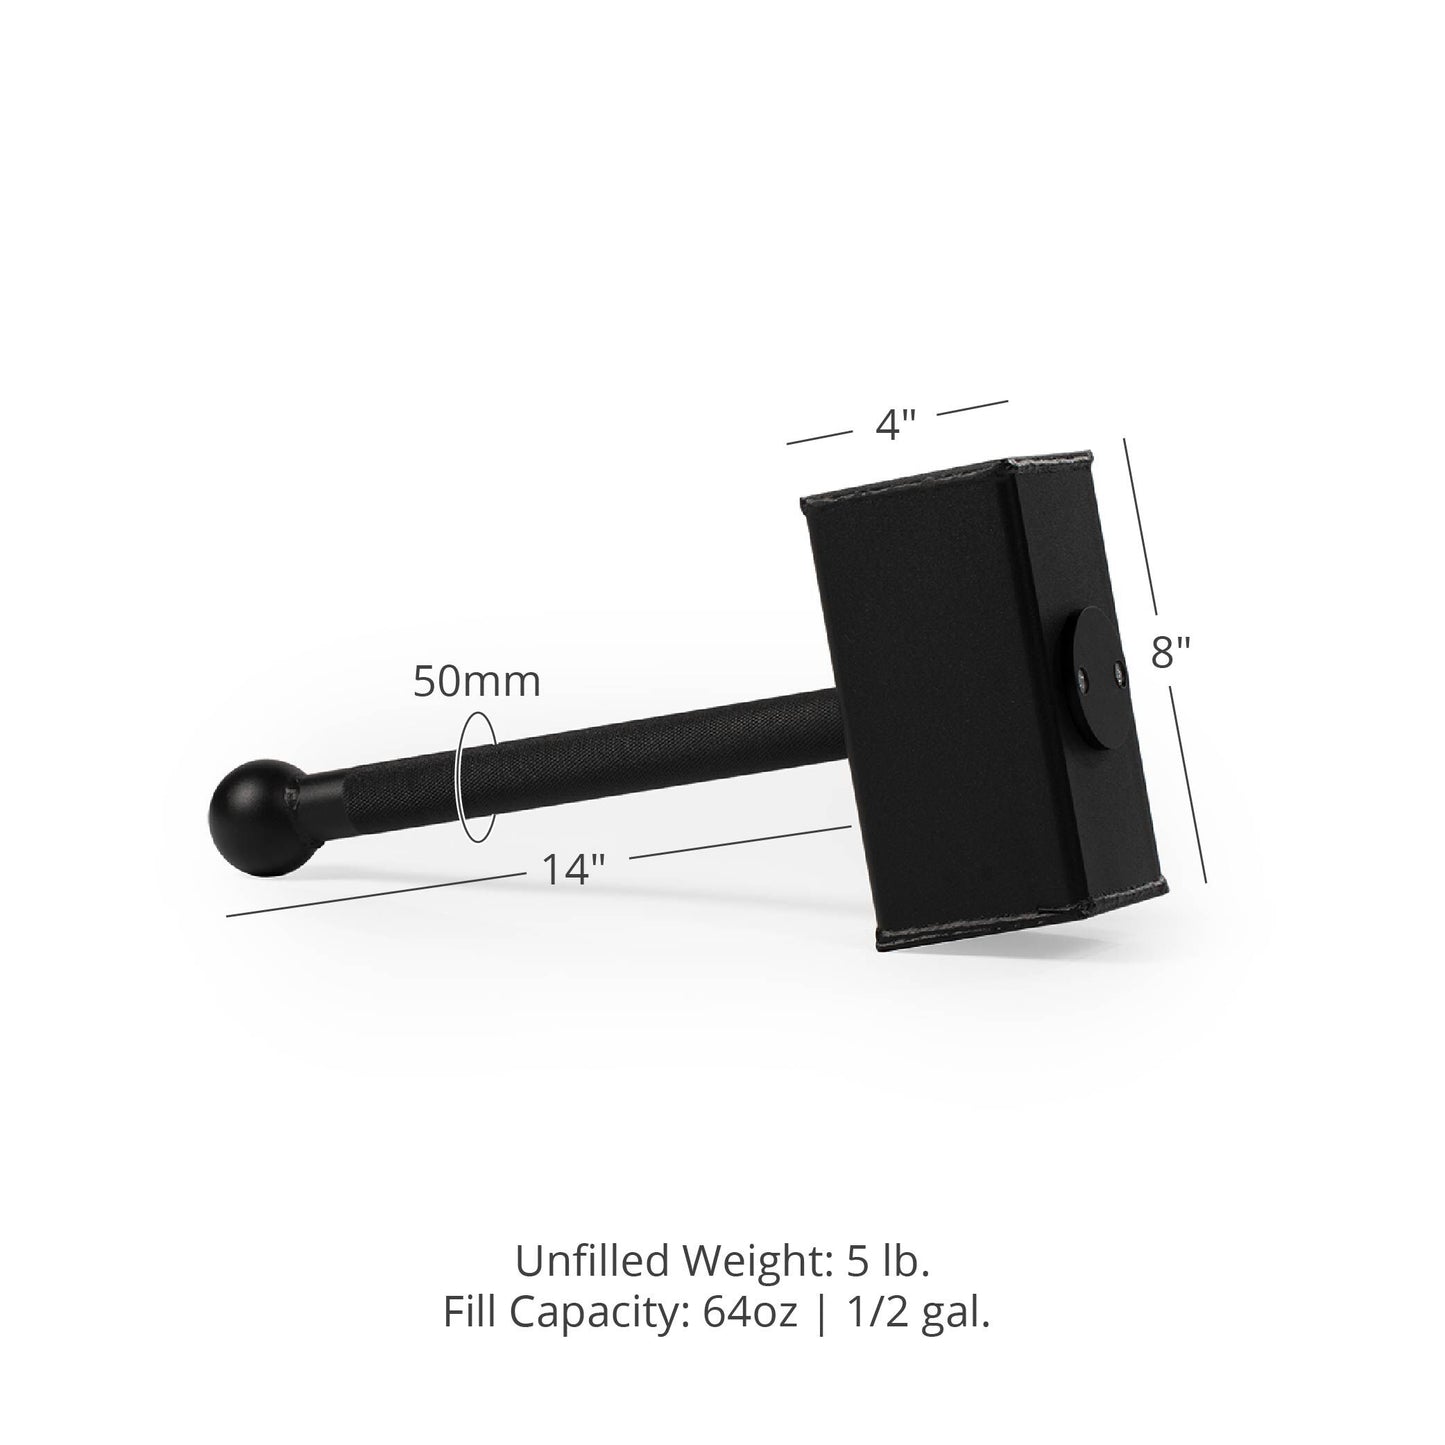 Loadable Thor Hammer - view 7